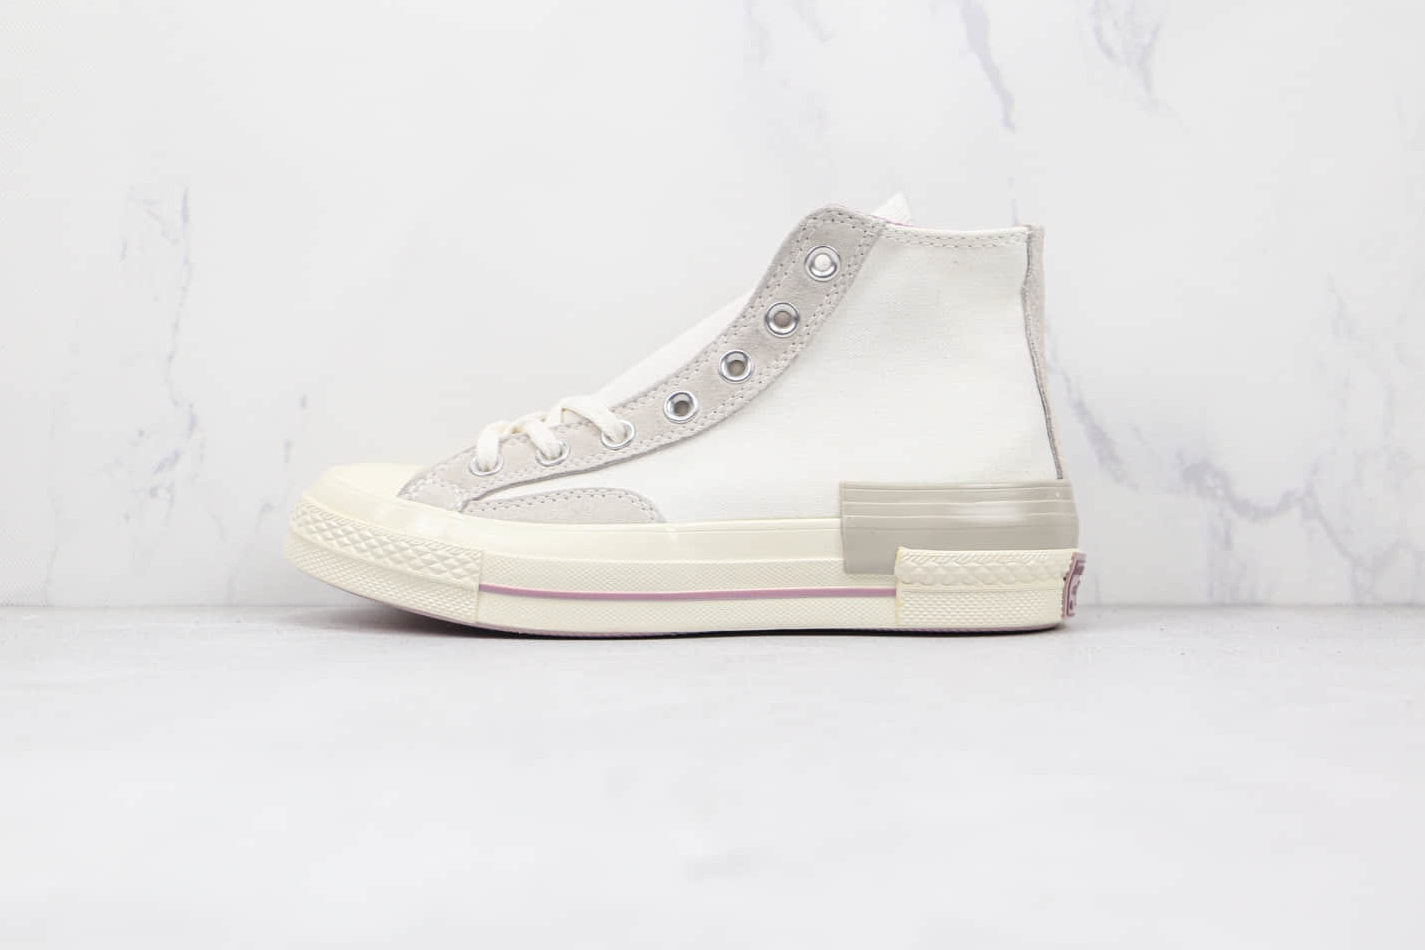 Converse Chuck Taylor All Star 1970s High-Top Canvas Shoes White 173101C - Unisex Fashion Footwear